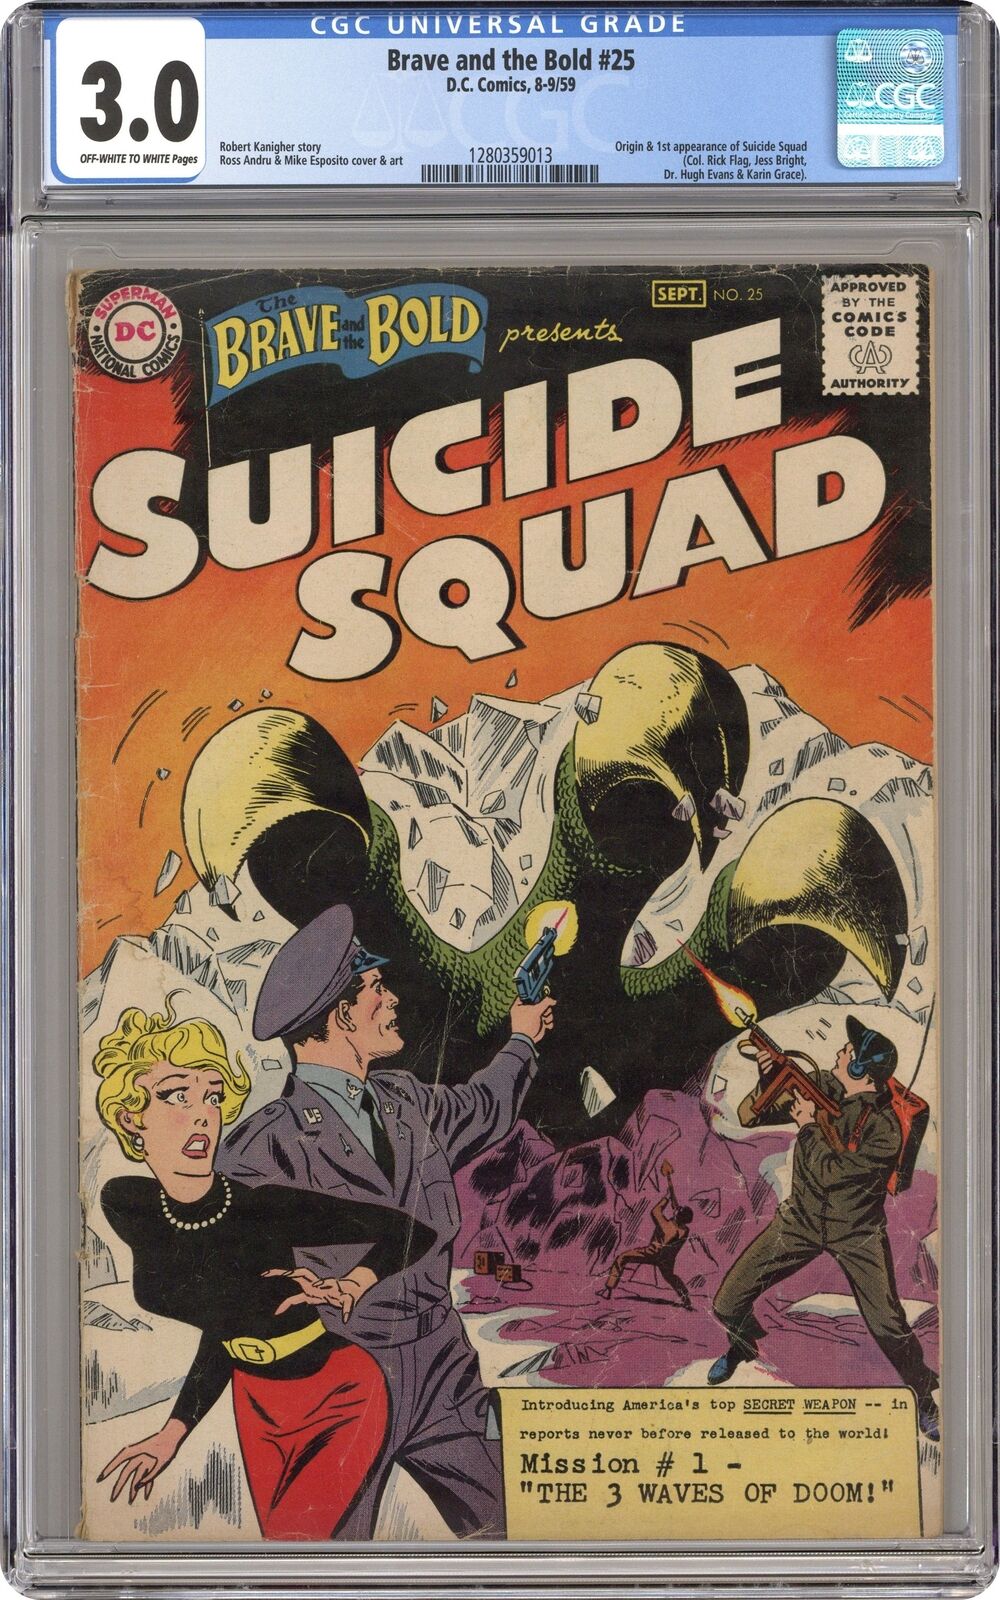 Brave and the Bold #25 CGC 3.0 1959 1280359013 1st app. Suicide Squad